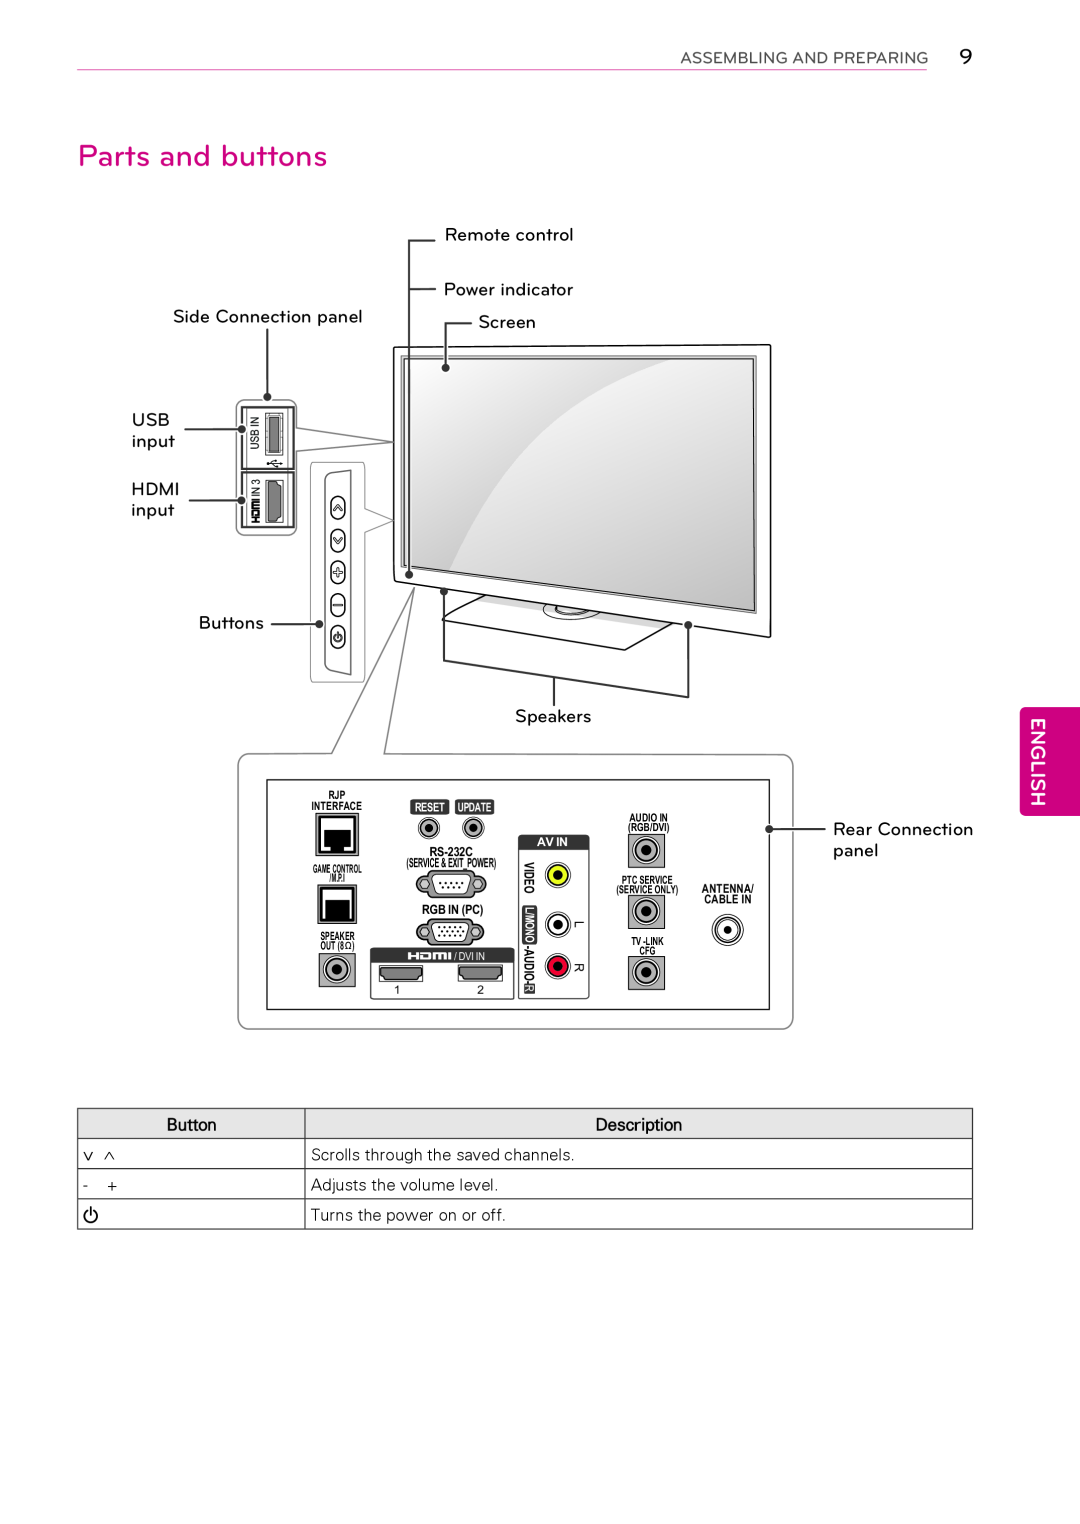 LG Electronics 37LT670H Parts and buttons, Assembling And Preparing, English, Oav In, Speaker Out, Dvi In, Ptc Service 